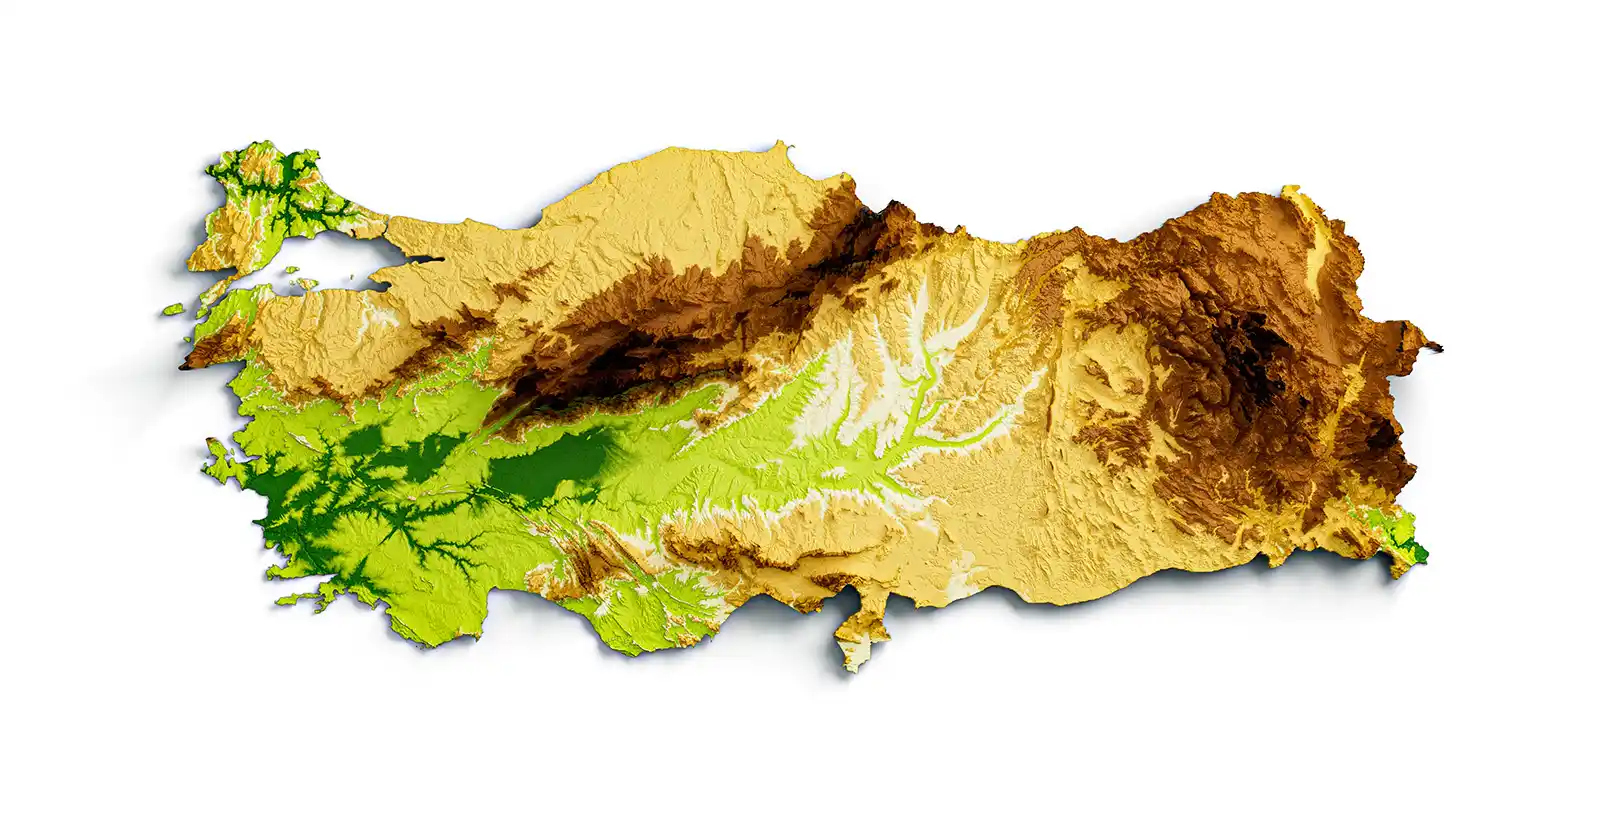 Turkish Geography: Turkey has hundreds of kilometers of mountain chains